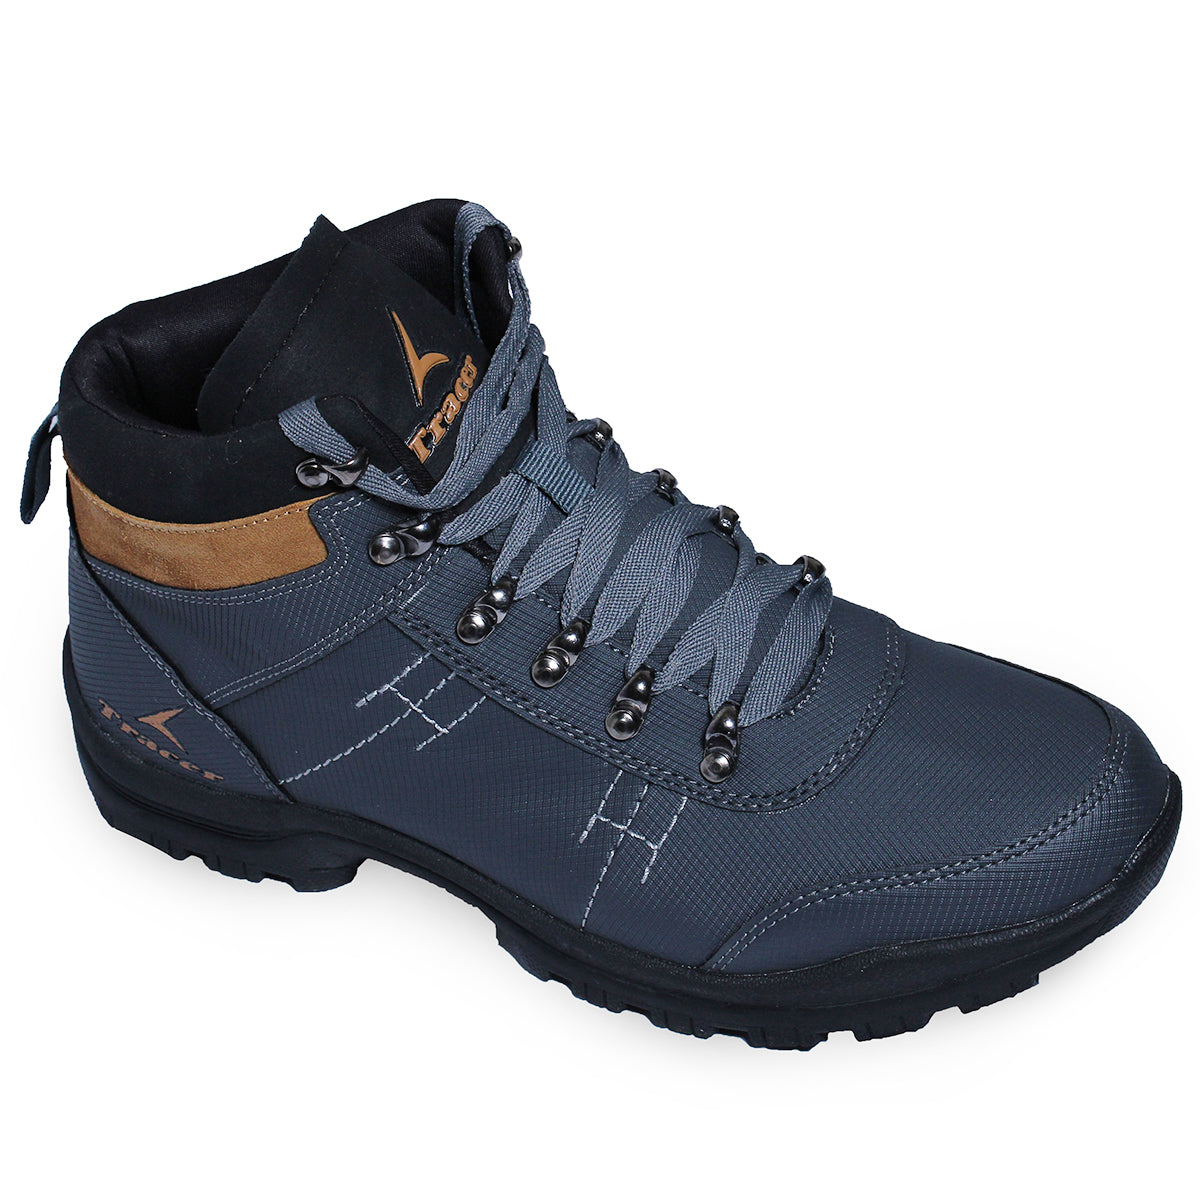 Shop Men Sports Shoes | Tracer India | Ultimate 1931 Shoes for Snow,  Trekking, Hiking, Running and Walking – TracerIndia